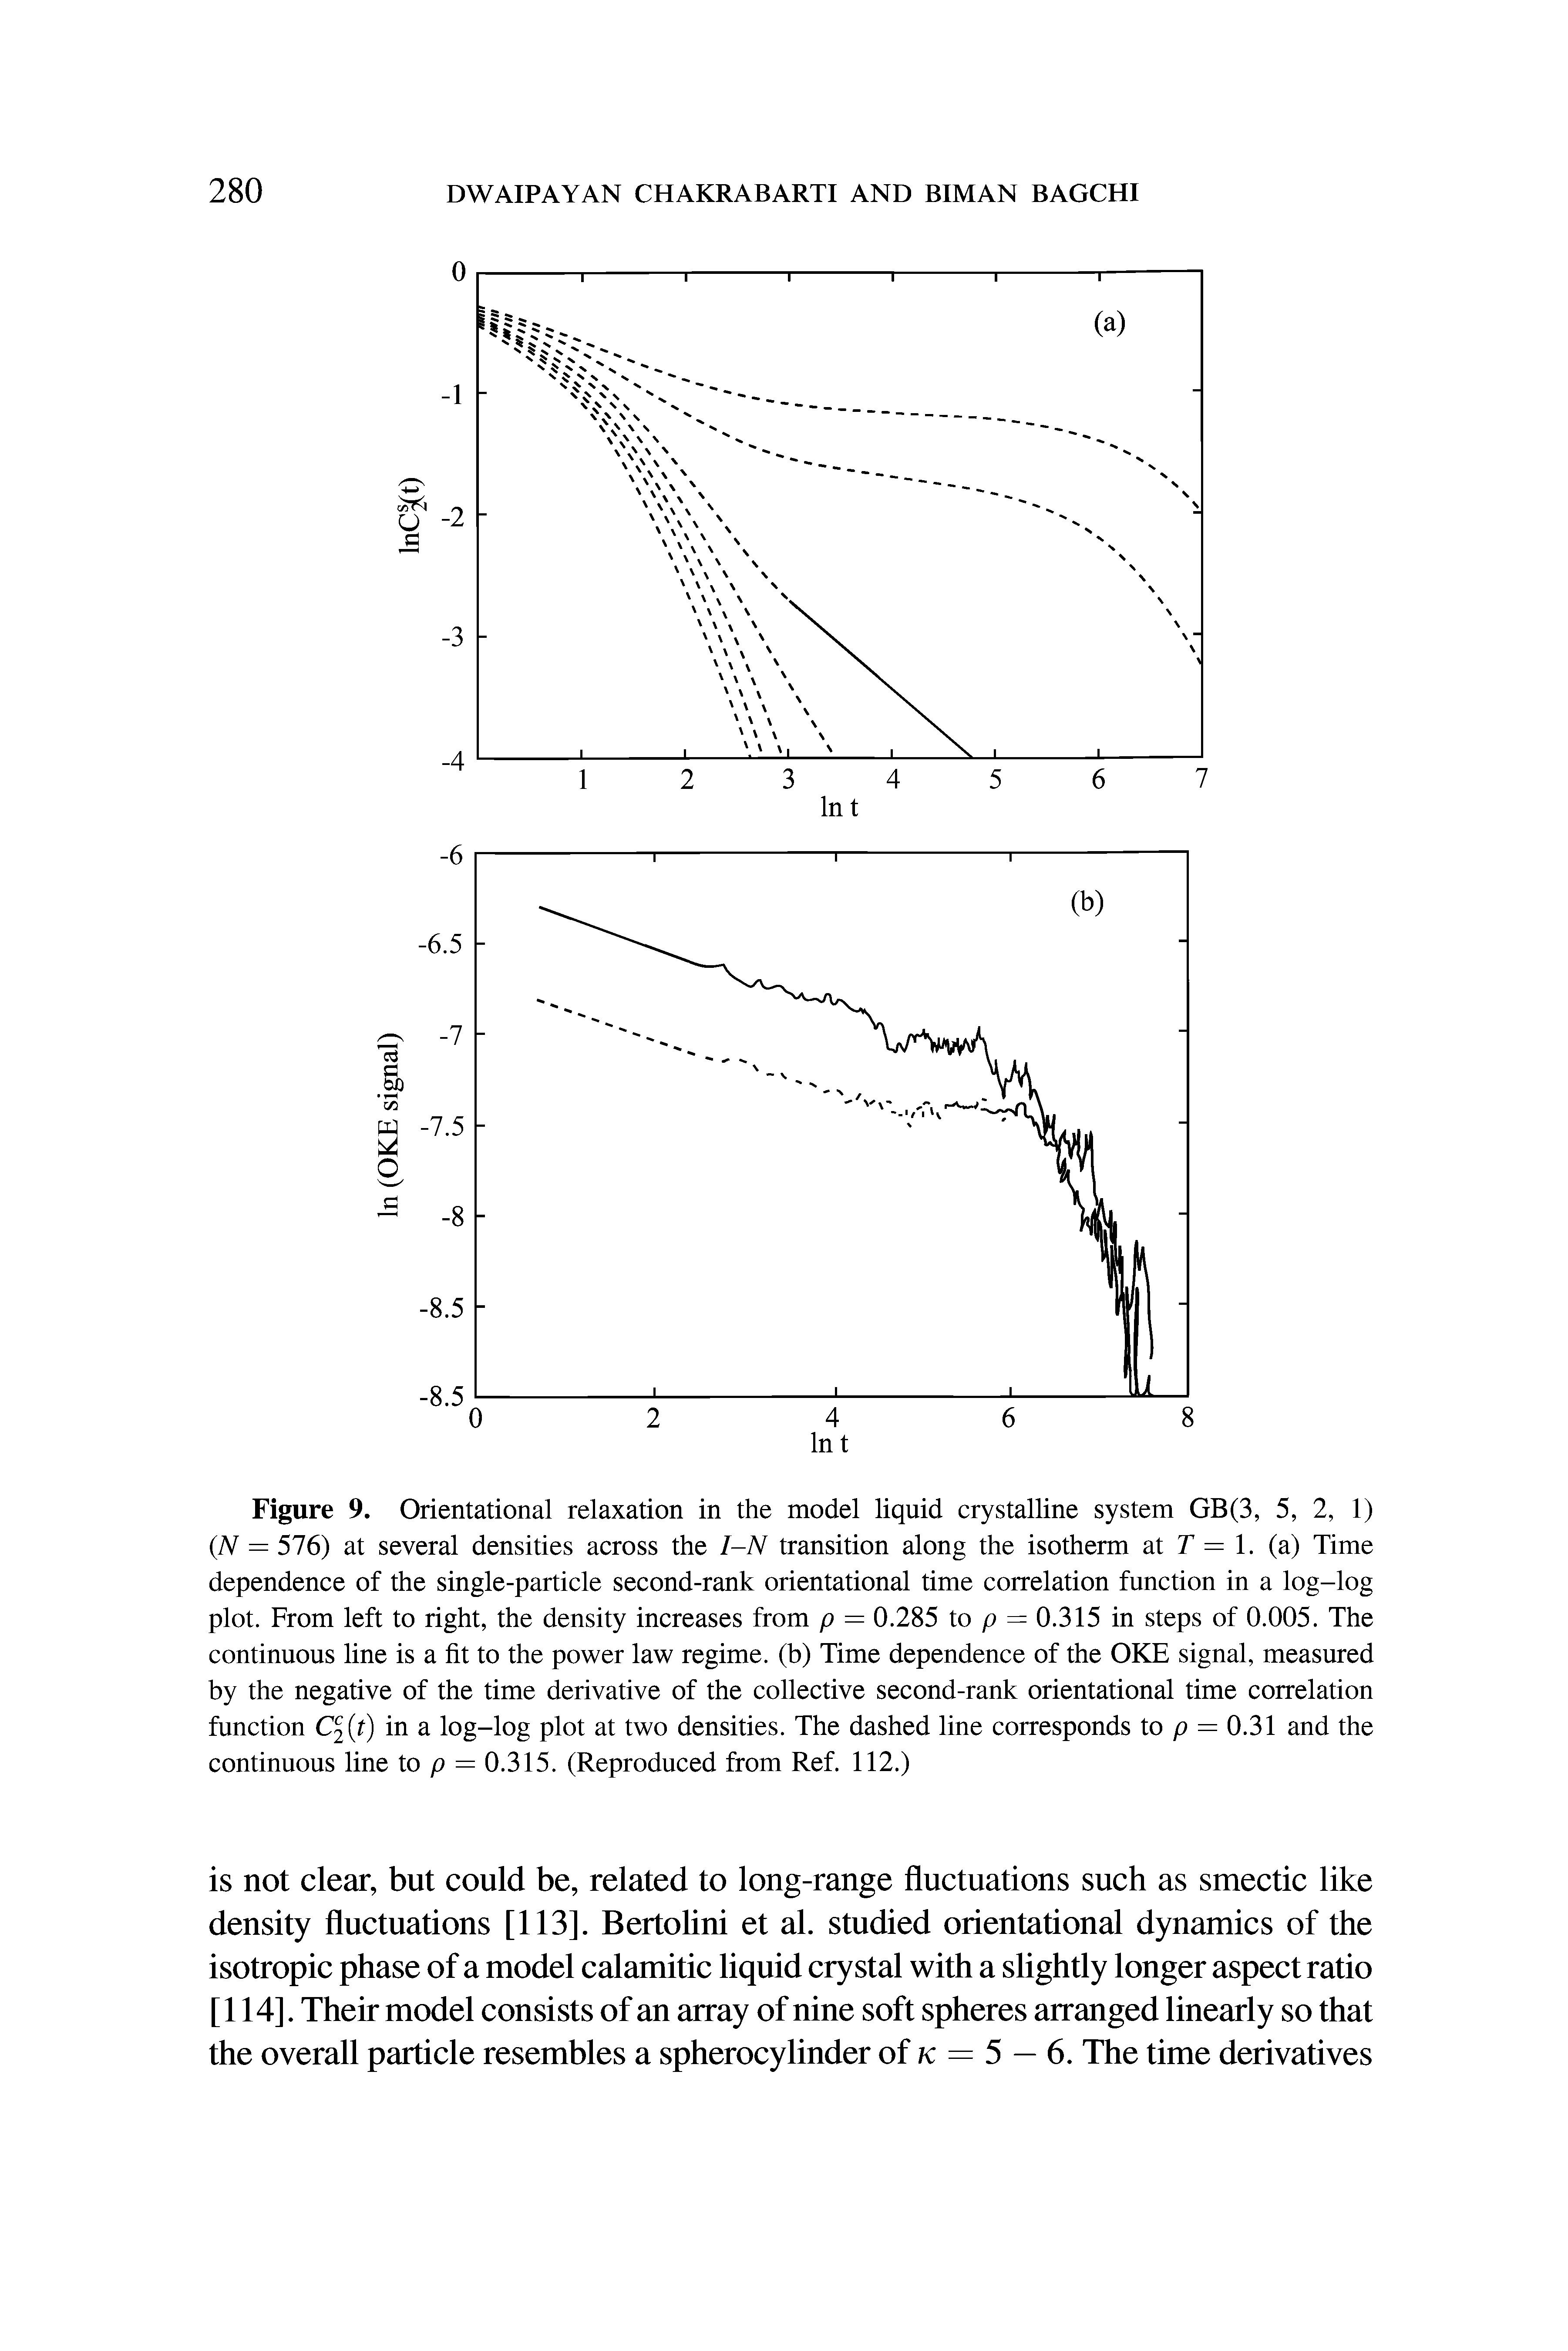 Figure 9. Orientational relaxation in the model liquid crystalline system GB(3, 5, 2, 1) (N = 576) at several densities across the I-N transition along the isotherm at T = 1. (a) Time dependence of the single-particle second-rank orientational time correlation function in a log-log plot. From left to right, the density increases from p = 0.285 to p = 0.315 in steps of 0.005. The continuous line is a fit to the power law regime, (b) Time dependence of the OKE signal, measured by the negative of the time derivative of the collective second-rank orientational time correlation function C t) in a log-log plot at two densities. The dashed line corresponds to p = 0.31 and the continuous line to p = 0.315. (Reproduced from Ref. 112.)...